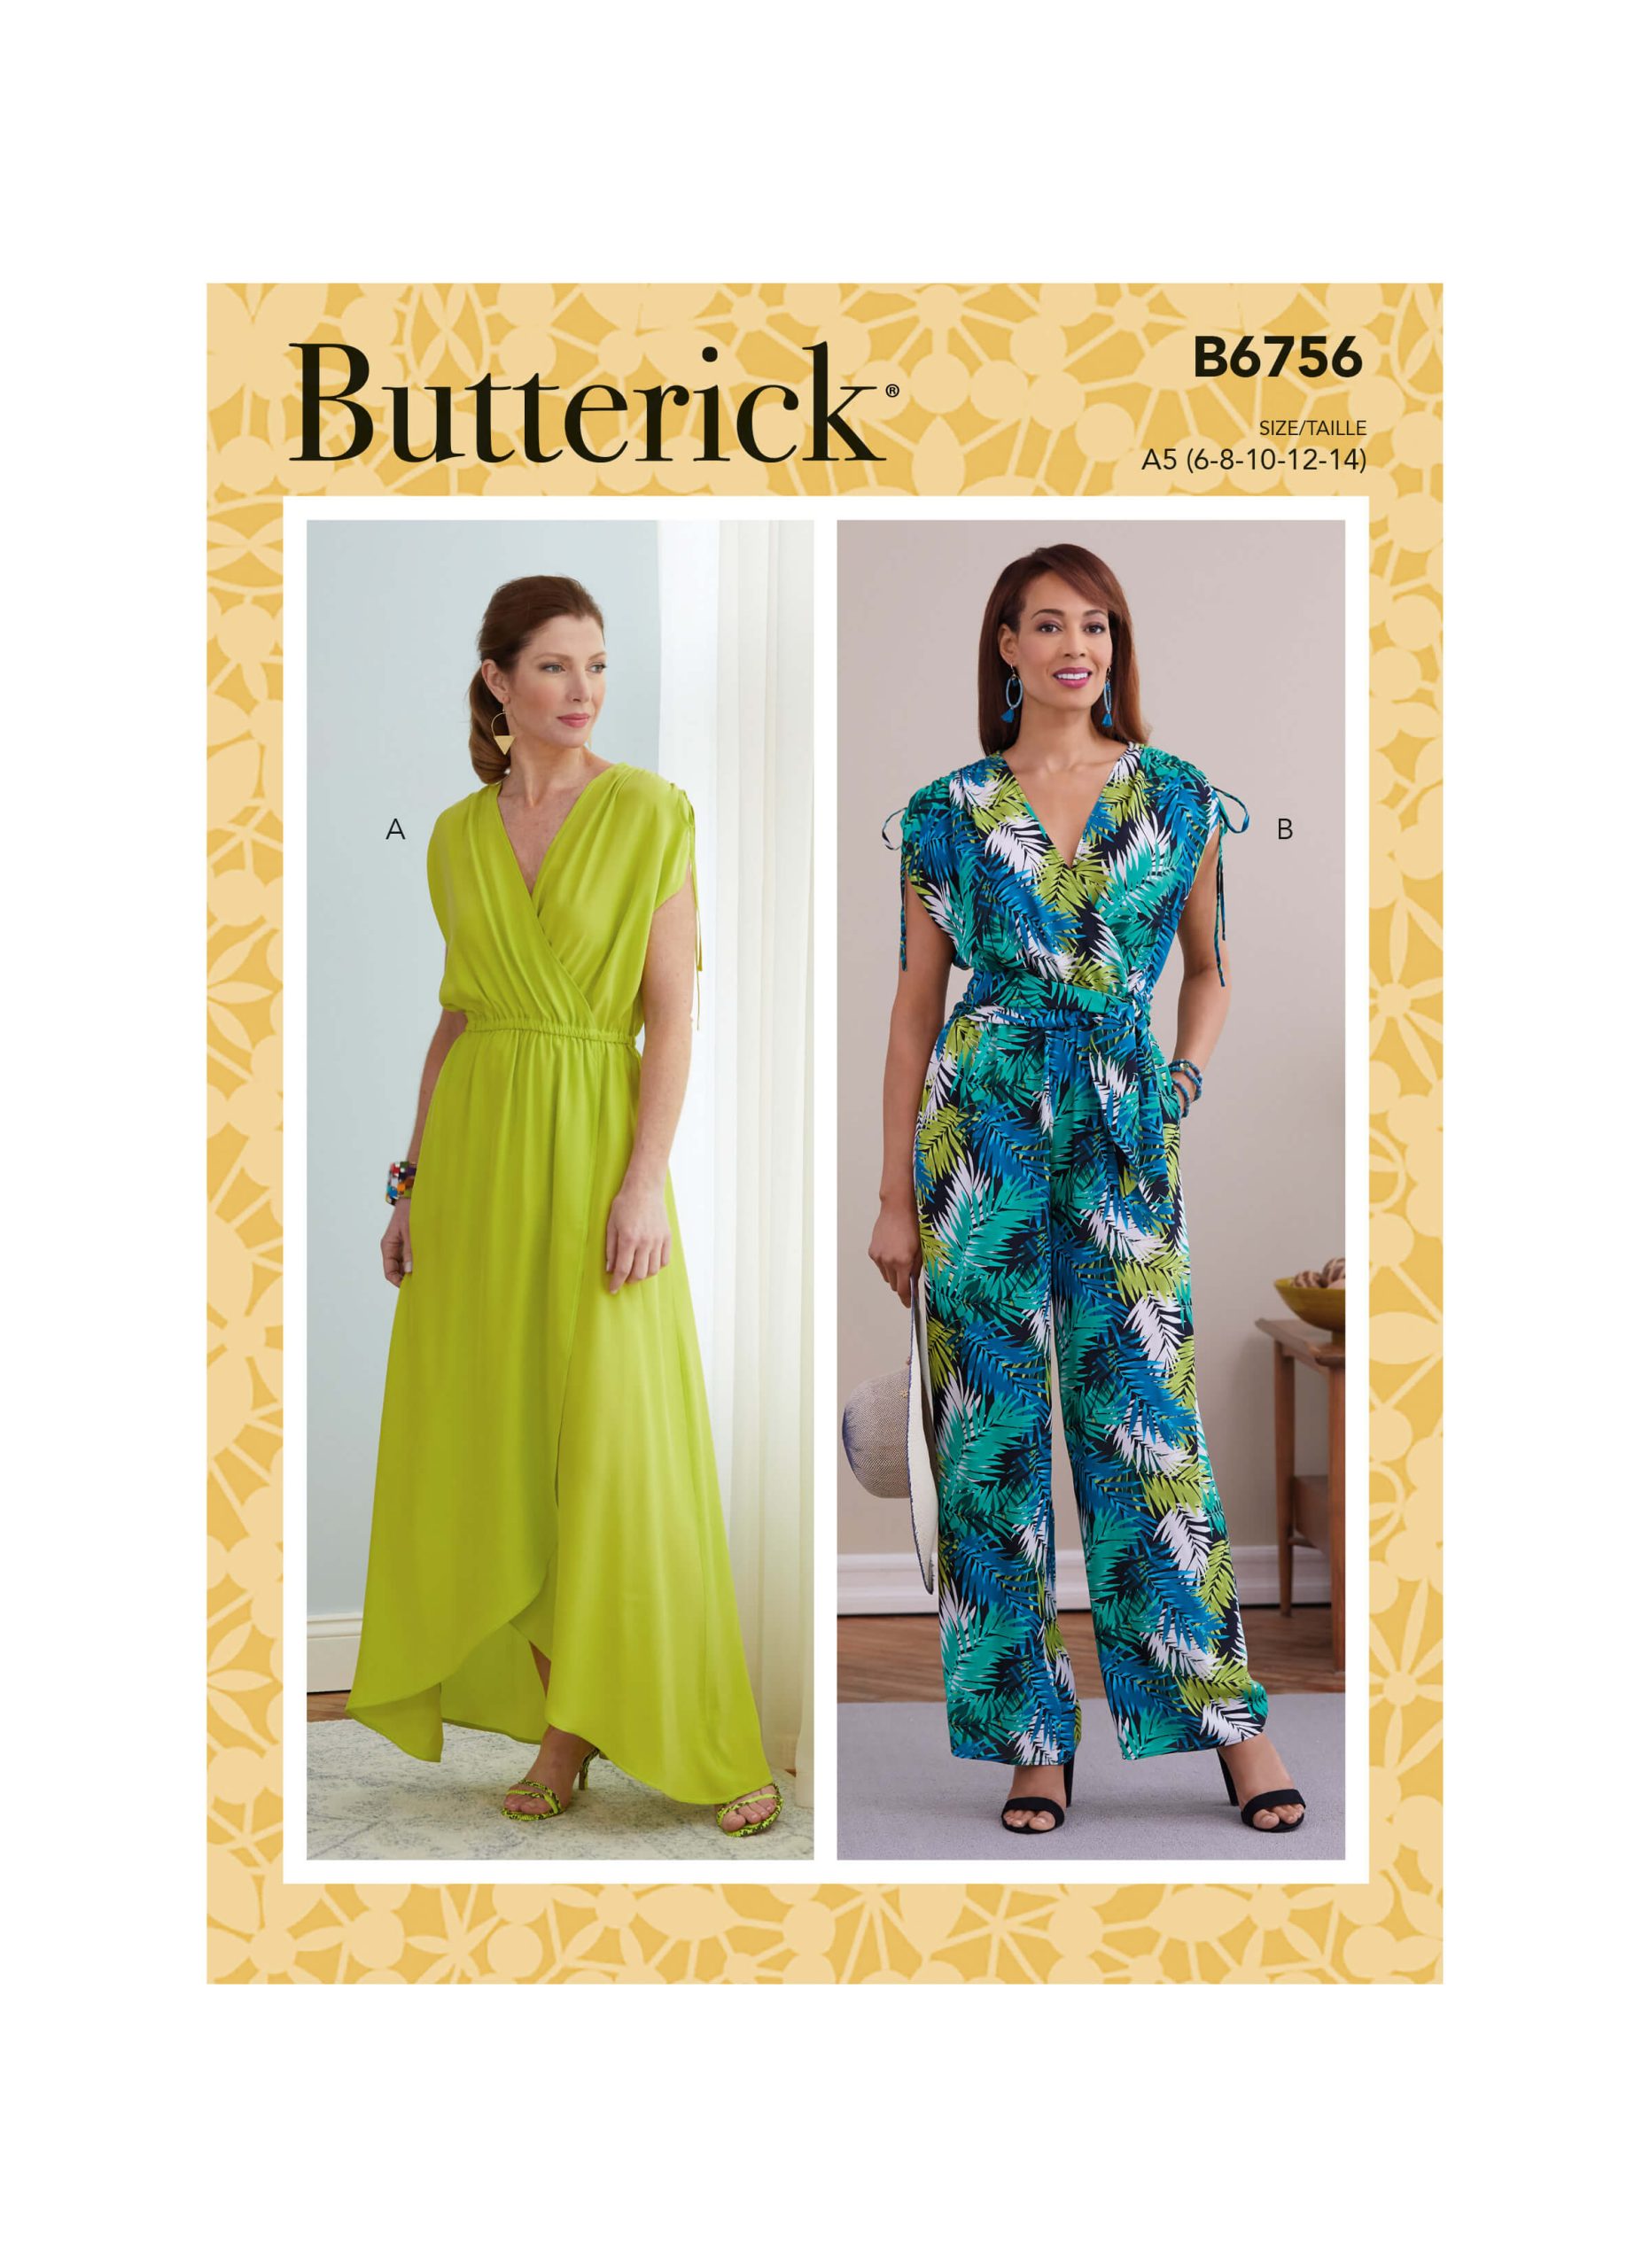 Butterick Sewing Pattern B6756 Misses' Dress, Jumpsuit and Sash